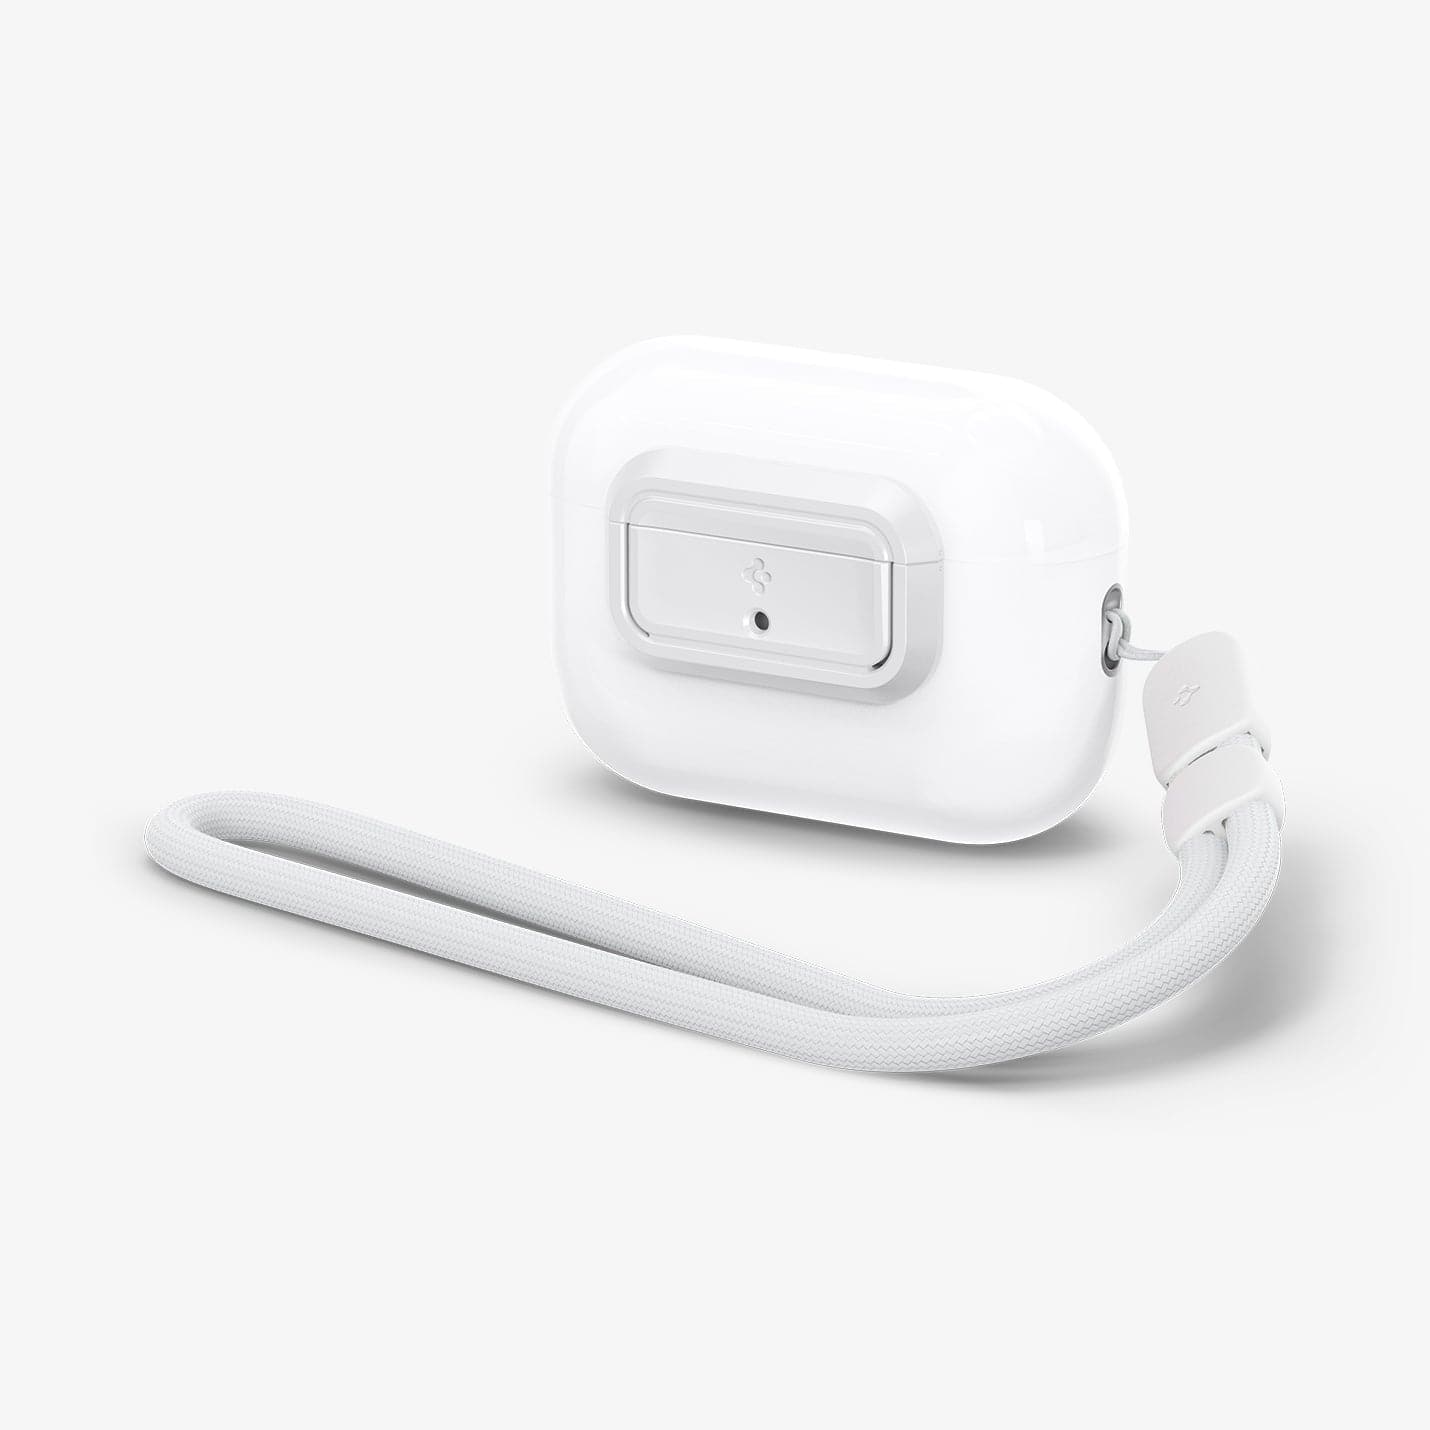 ASD06090 - Apple AirPods Pro / AirPods Pro 2 Case Lock Fit in white showing the front and side with lanyard attached